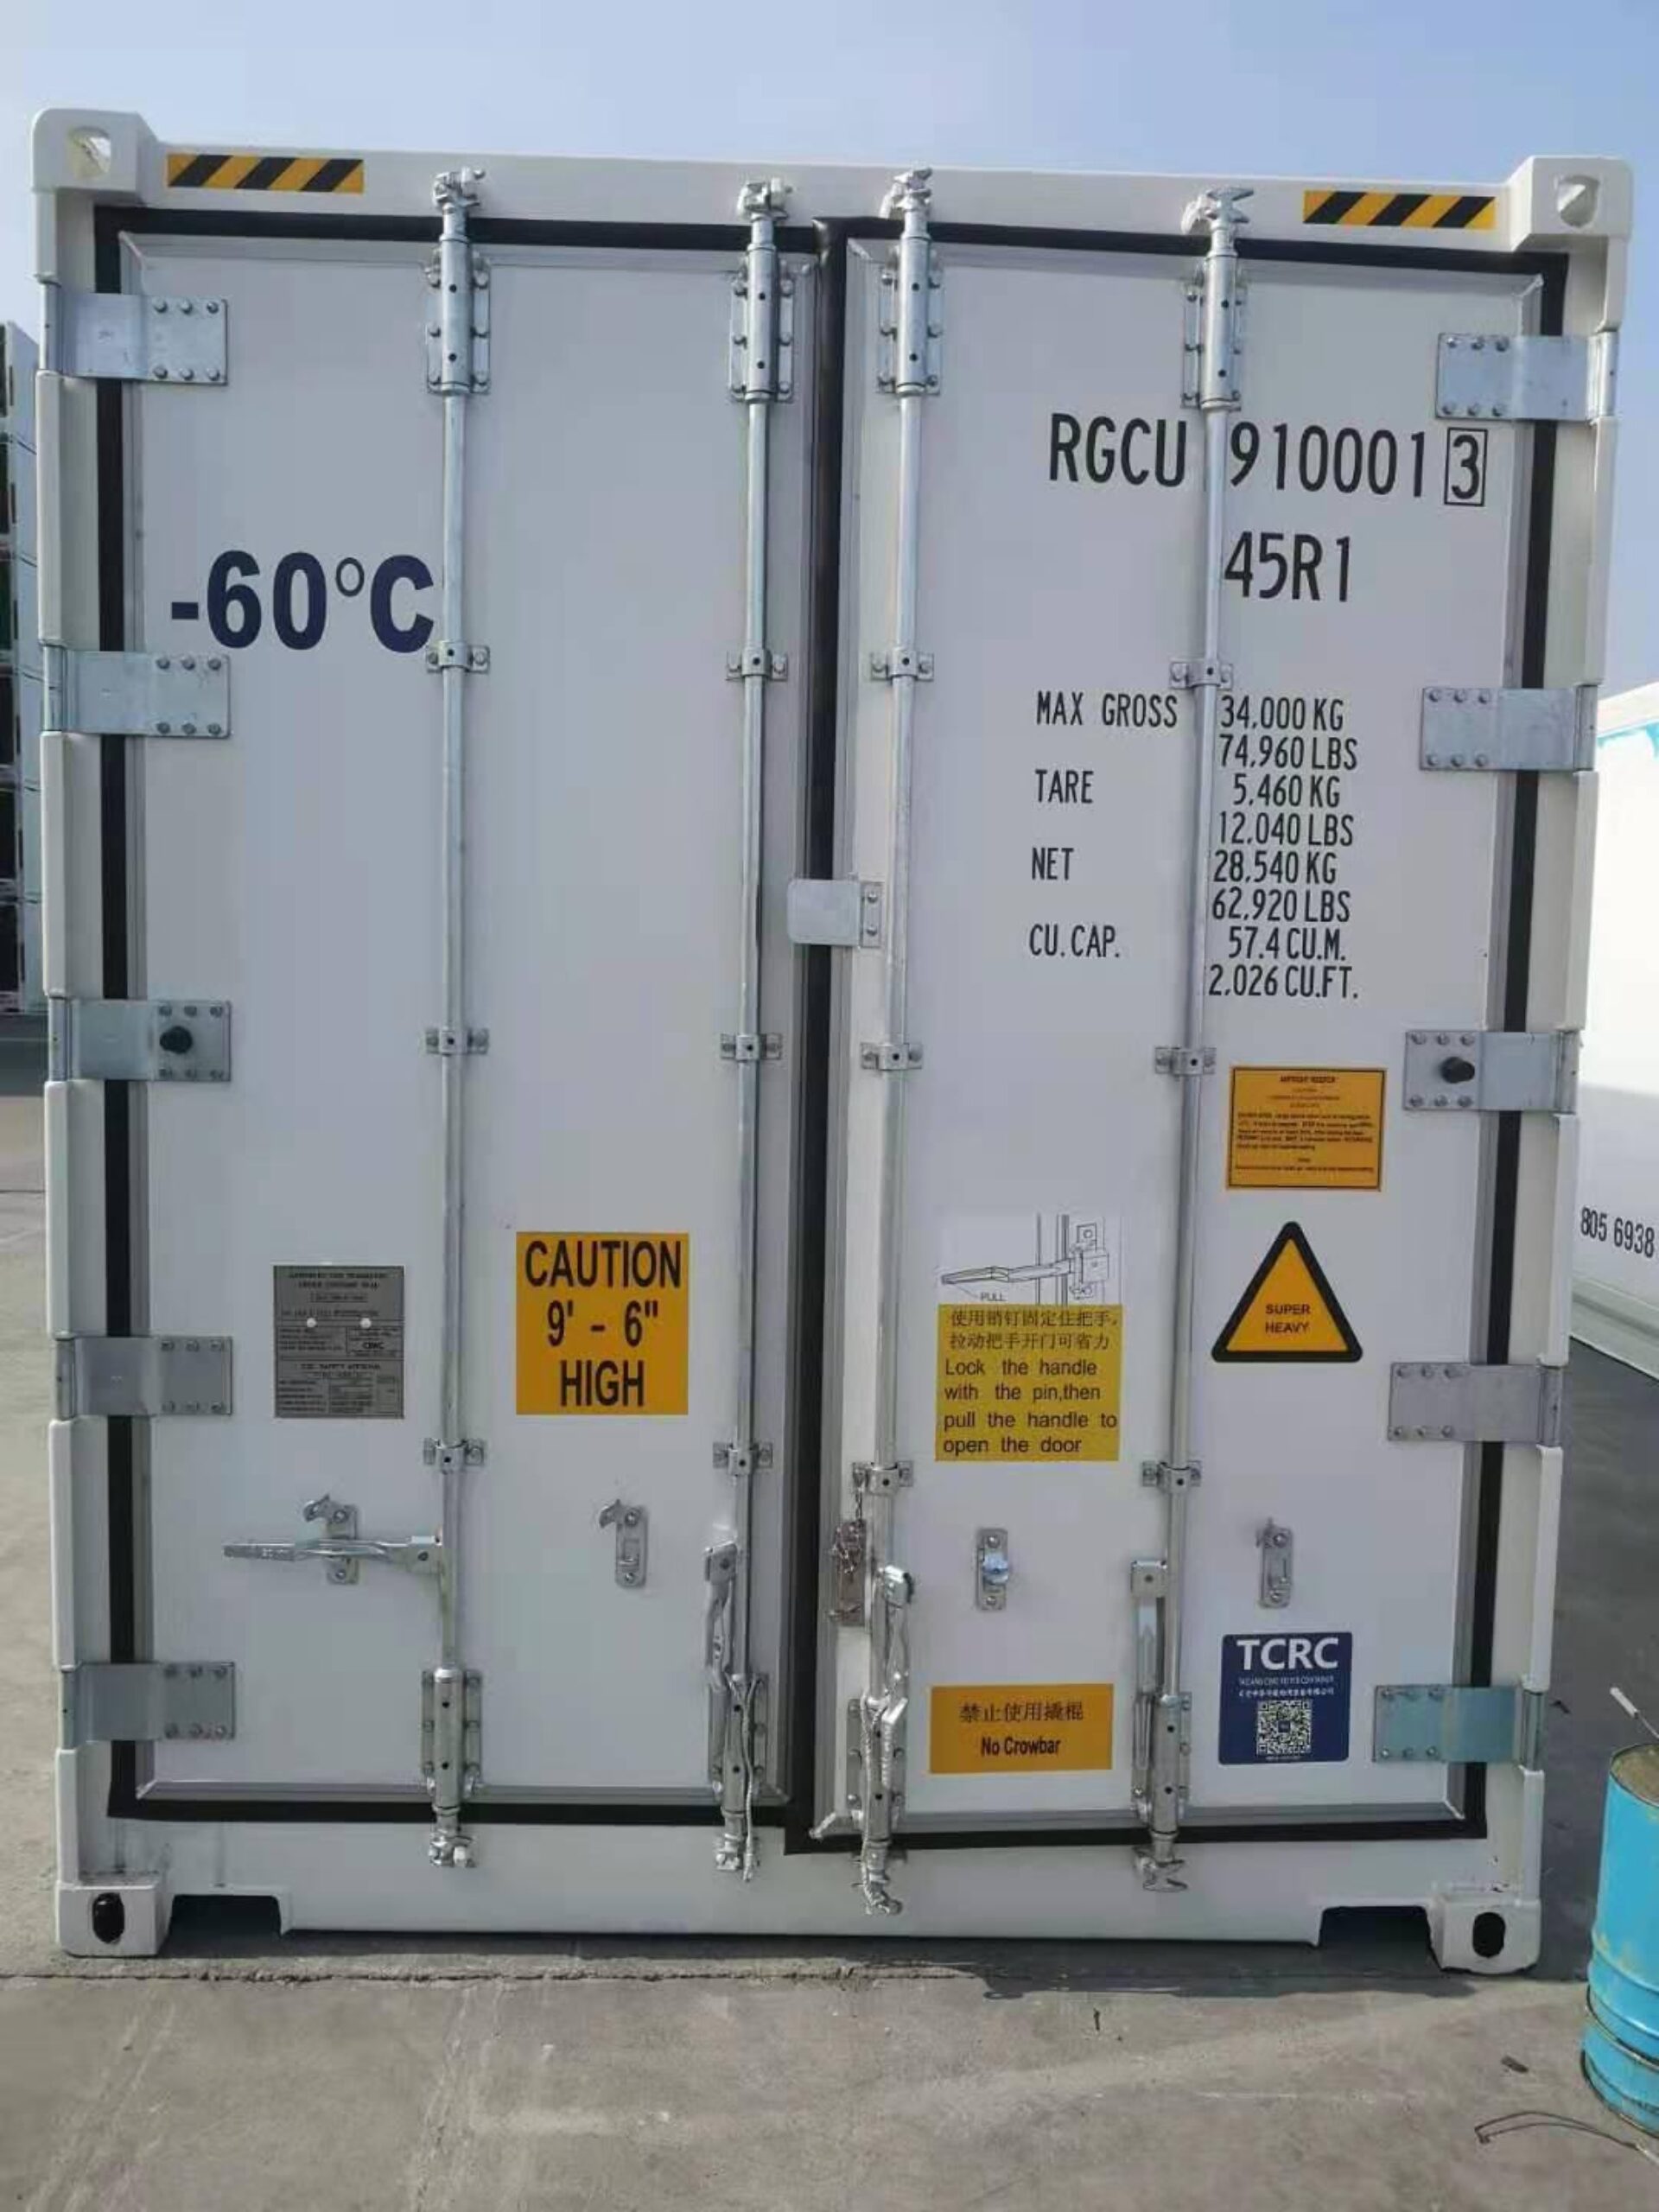 40' Refrigerated Container (SUPER FREEZER) - RAVA Group Container Services